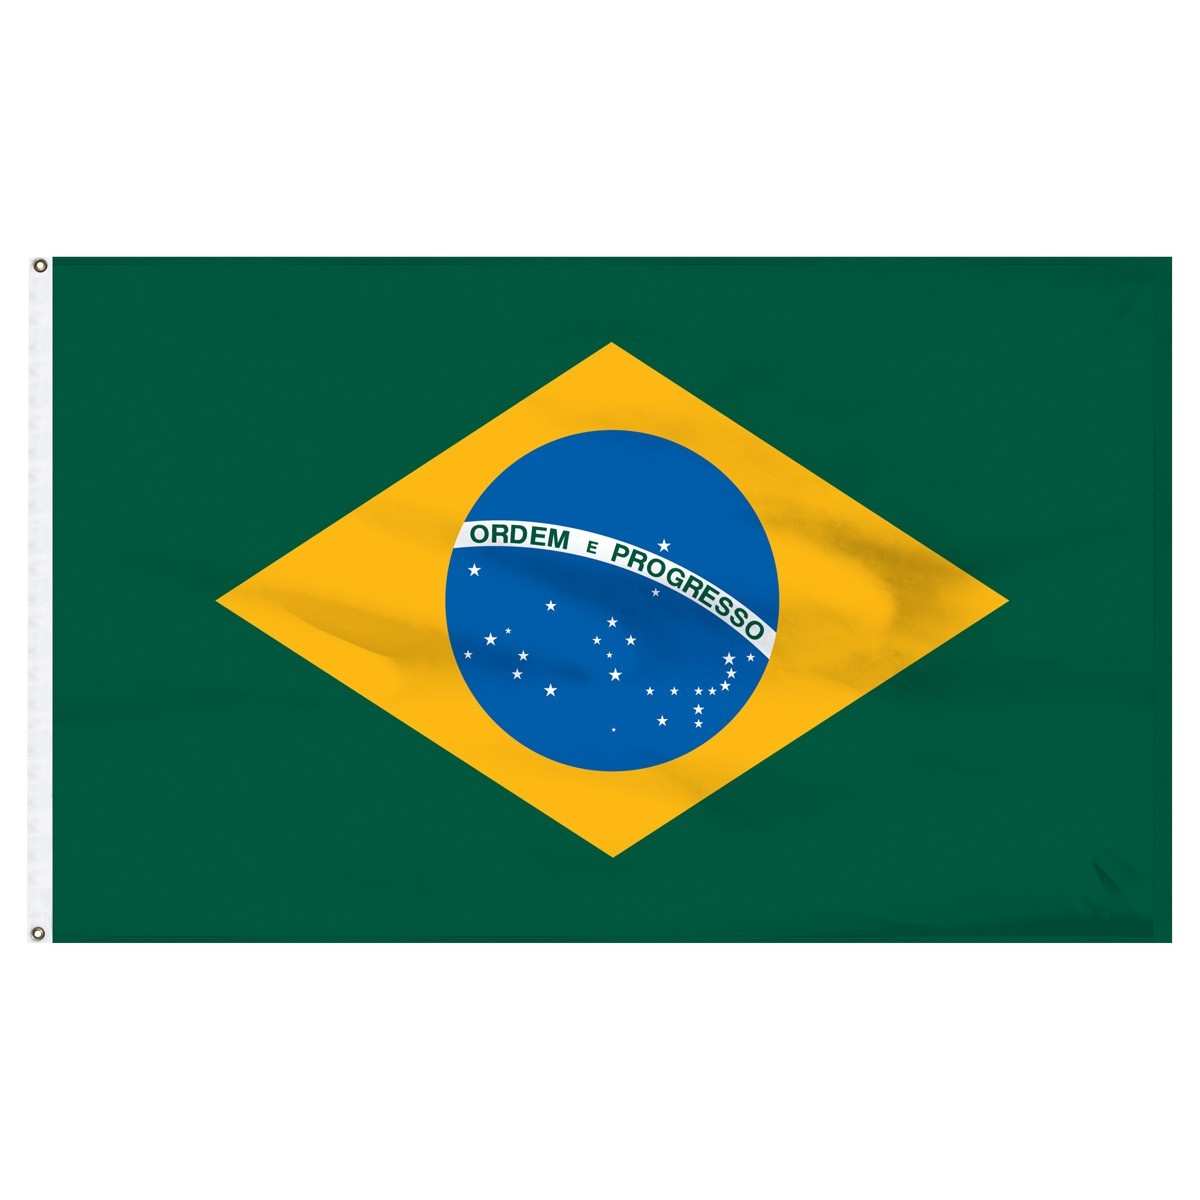 Shop Brazil flags for sale high quality nylon made in the USA flags